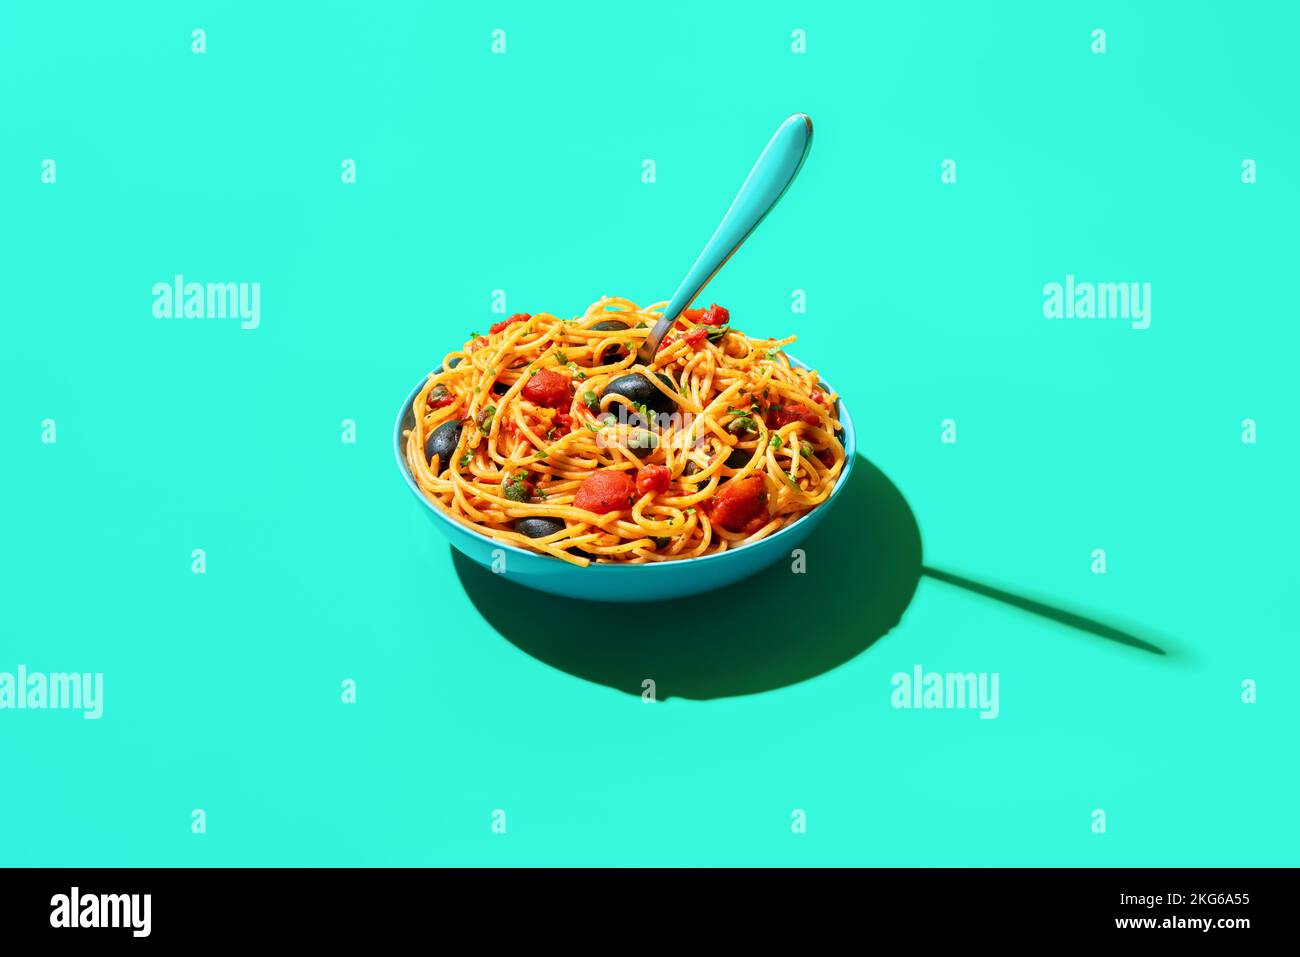 Italian dish, spaghetti with tomato sauce, black olives and capers minimalist on a green table. Vegan pasta bowl in bright light on a green background Stock Photo